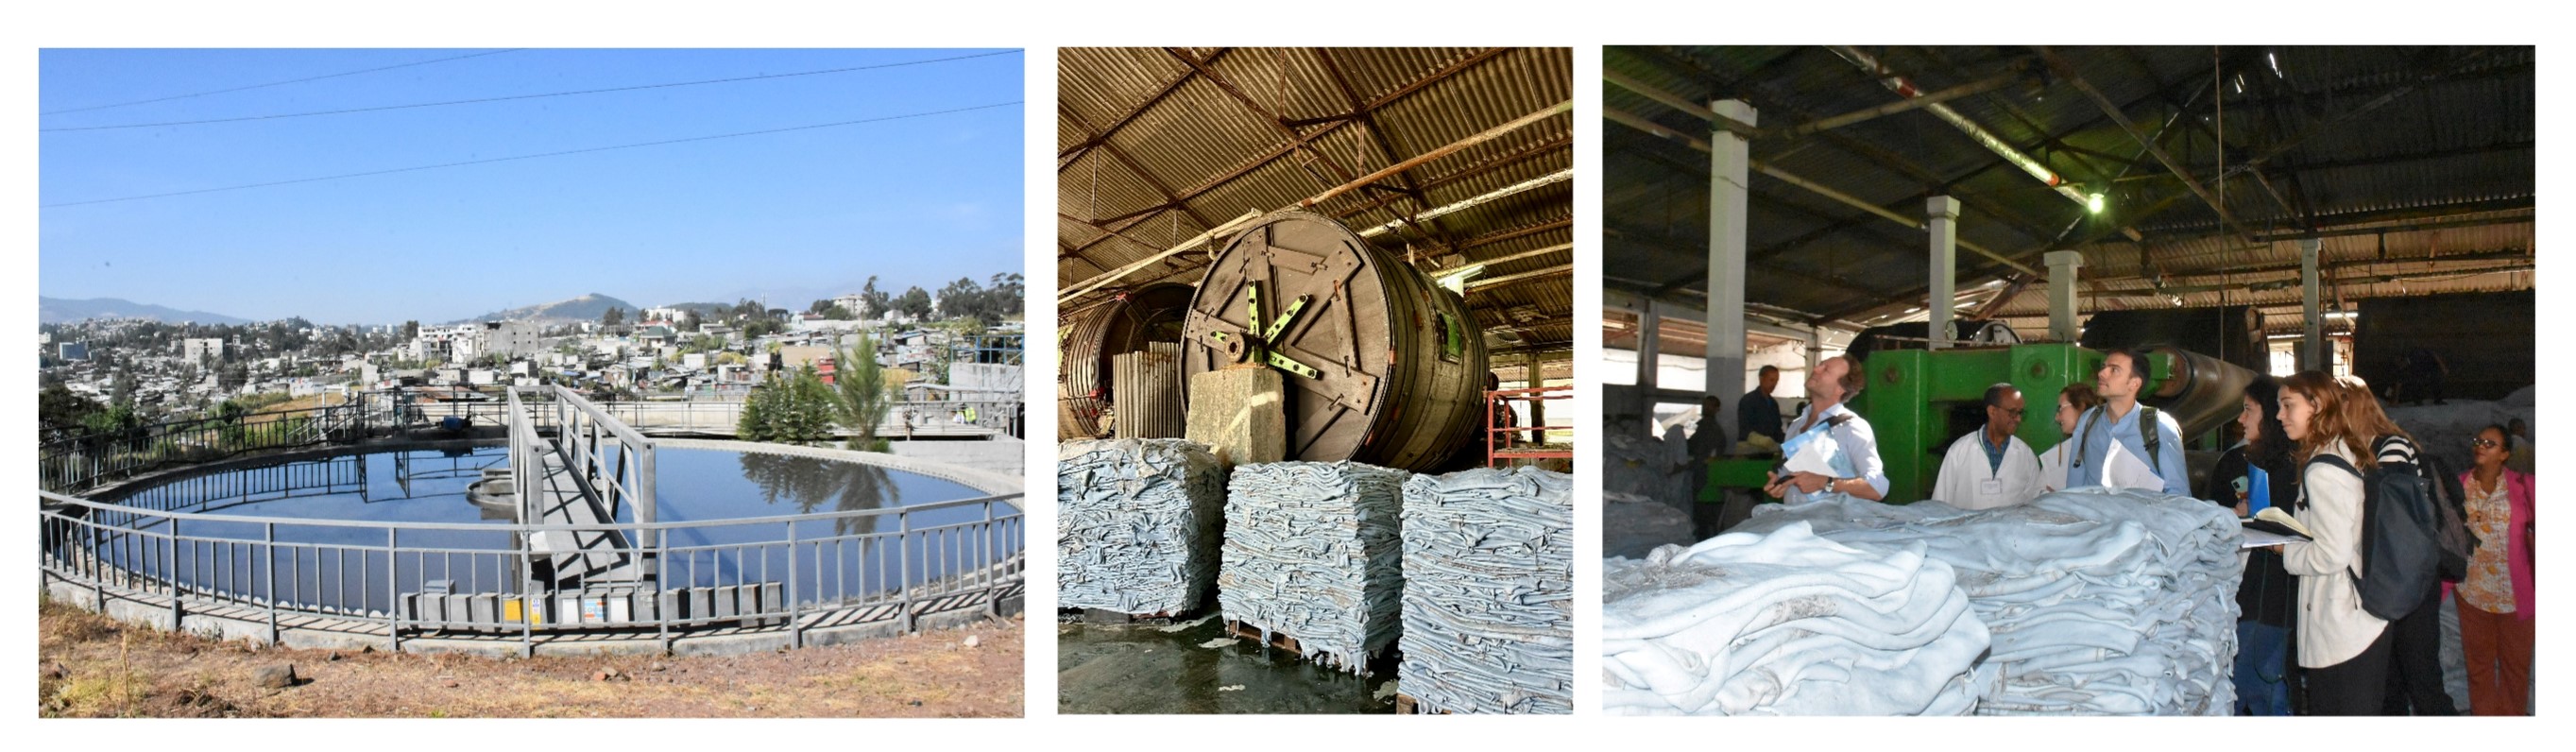 Visit to the Awash tannery in Addis Ababa ©EUTF 